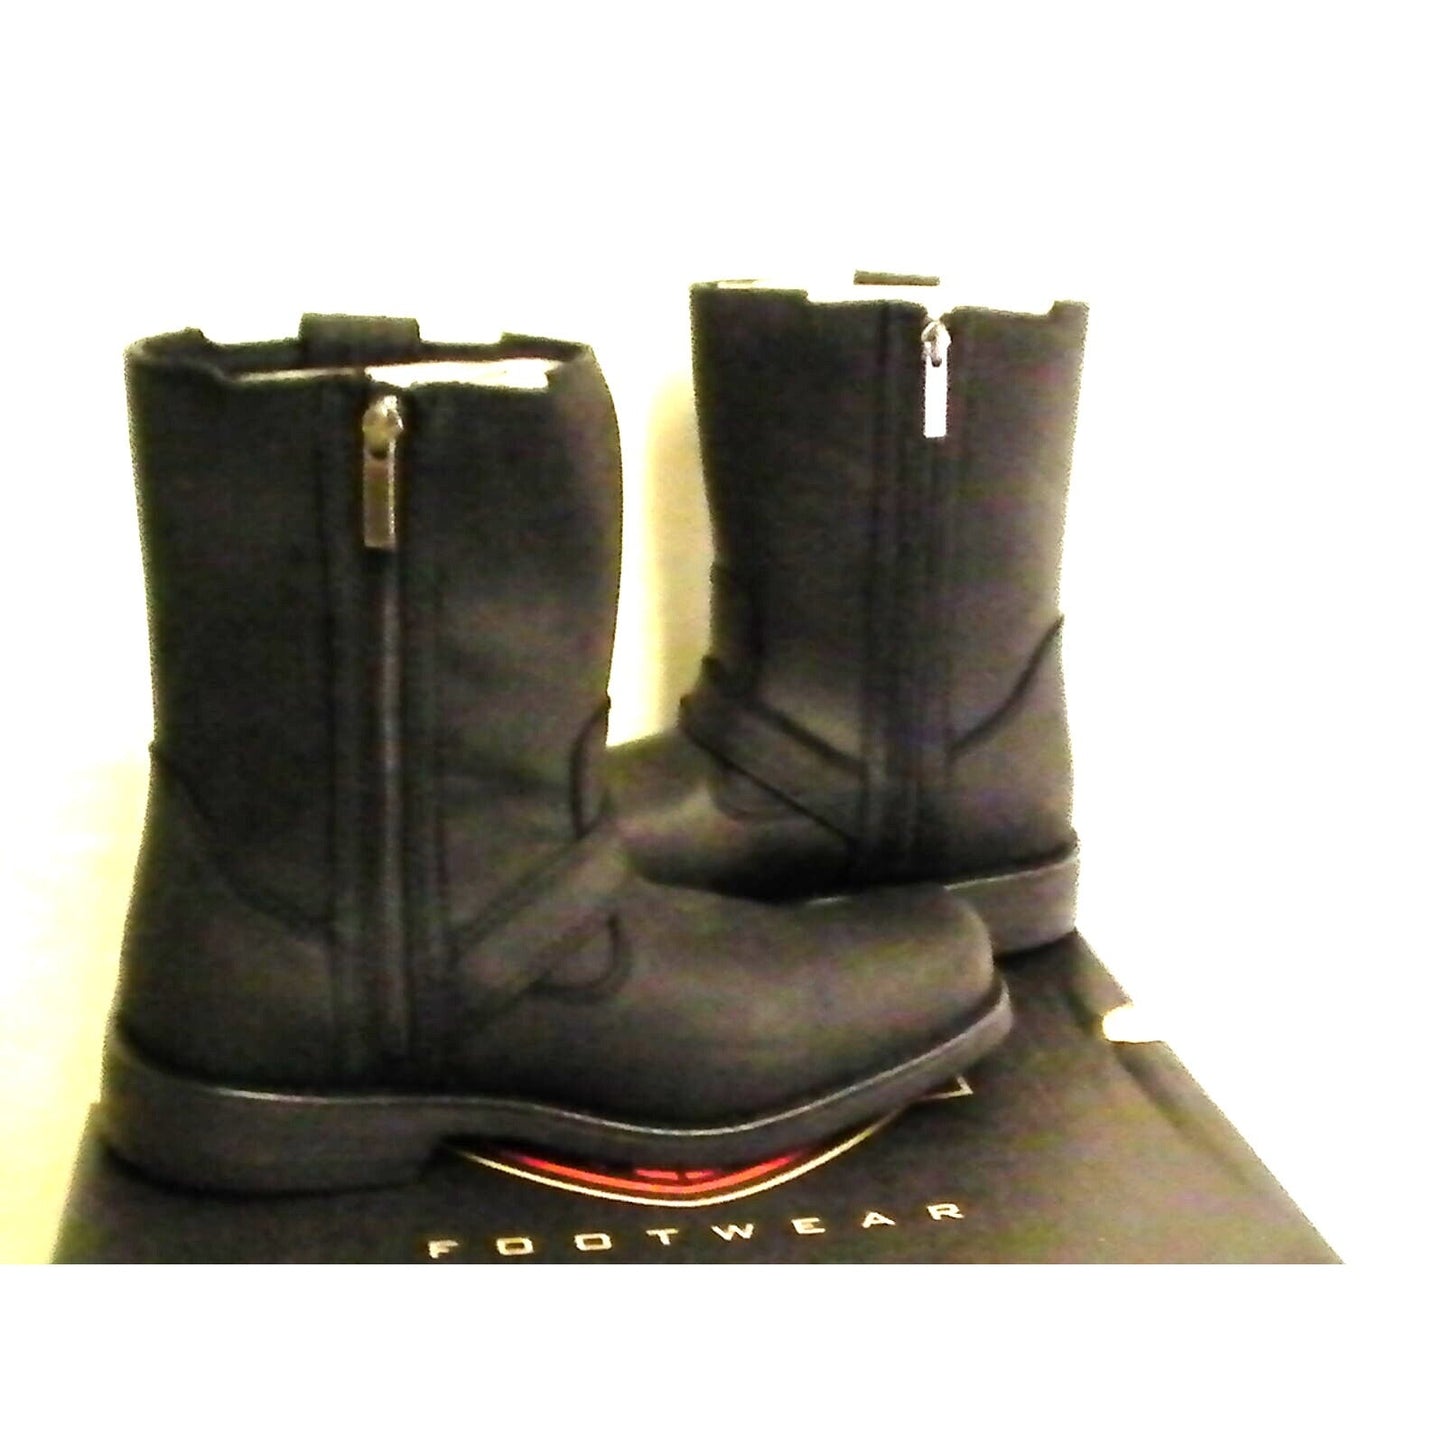 Harley davidson mens riding boots troy size 9 new with box - Classic Fashion Deals